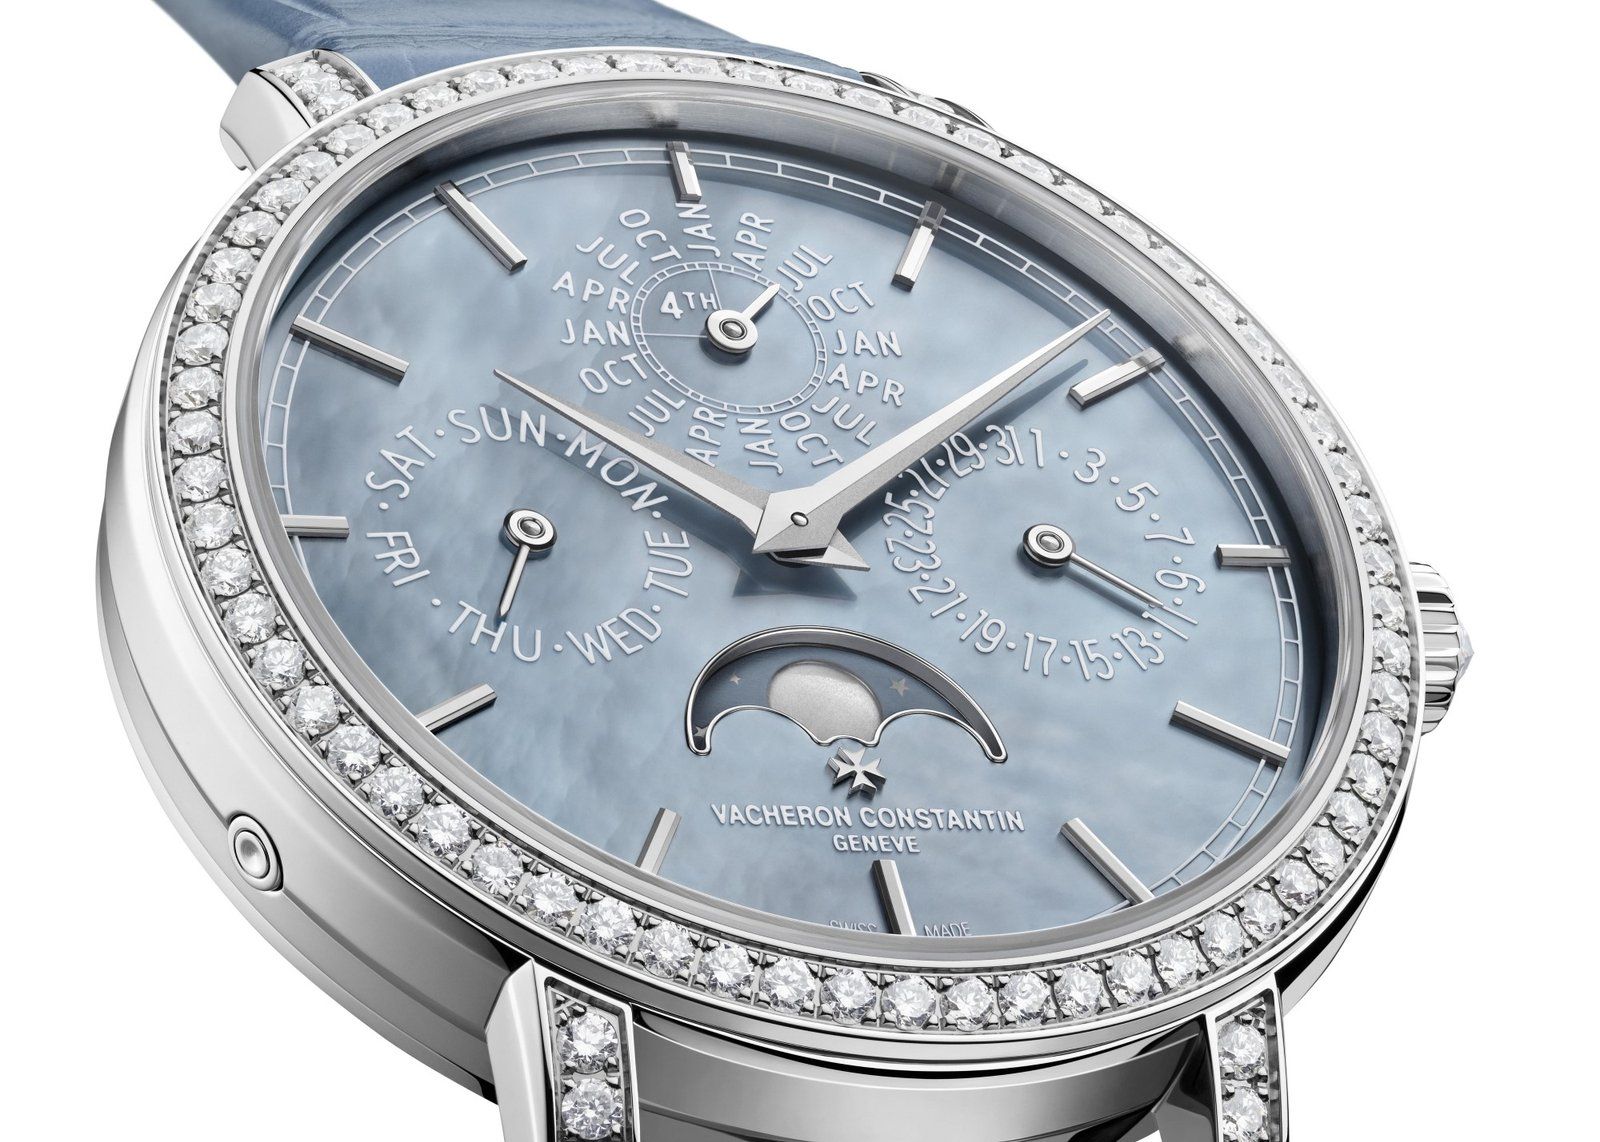 Blue-grey tinted mother-of-pearl dial featuring the perpetual calendar